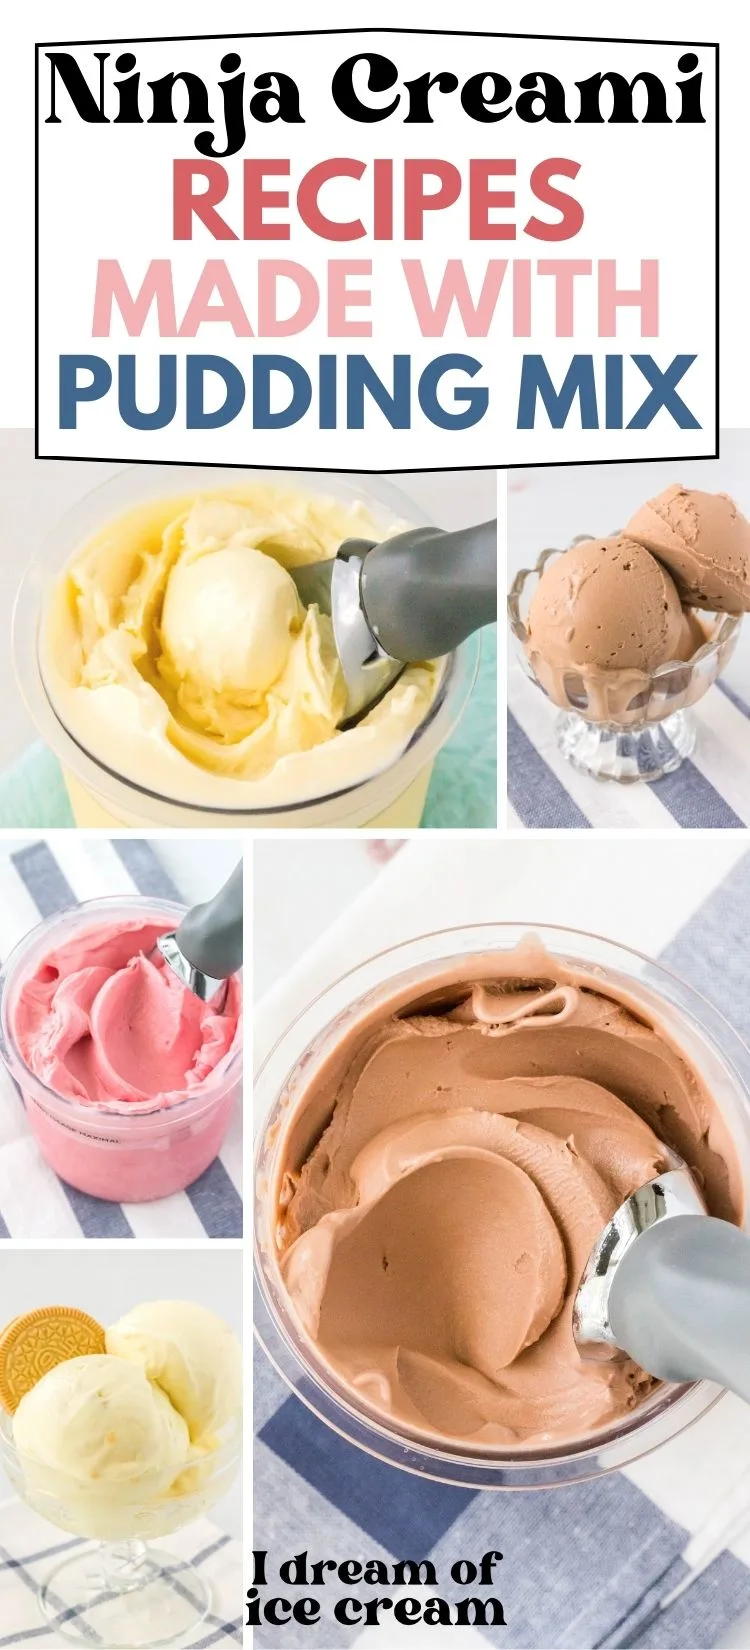 collage image featuring five different Ninja Creami ice cream varieties that were made with instant pudding mix.